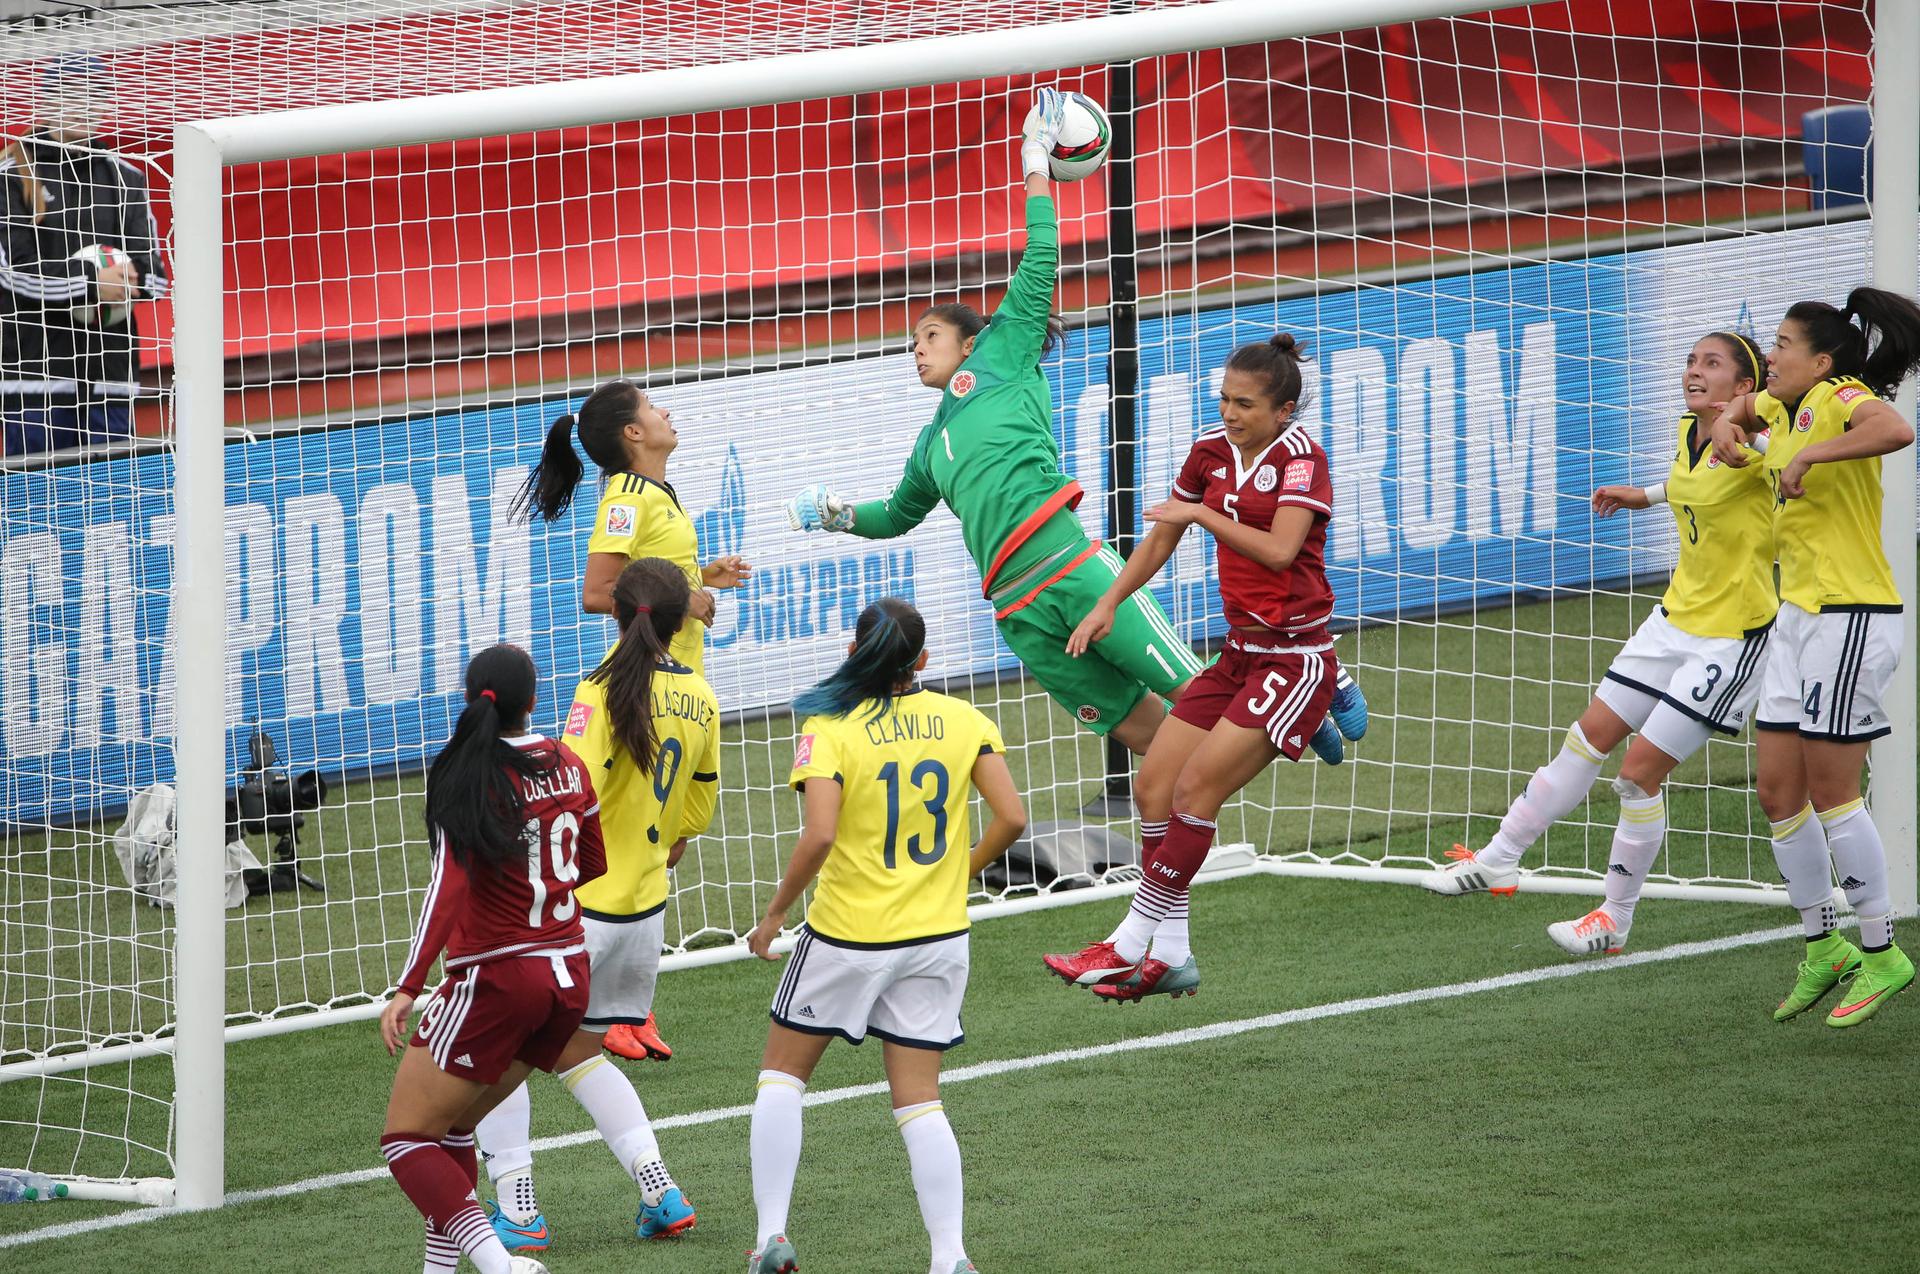 Mexico midfielder Veronica Perez scores a goal past Colombia goalkeeper Stefany Castano (1) during a Group F soccer match in the 2015 FIFA Women's World Cup at Moncton Stadium.